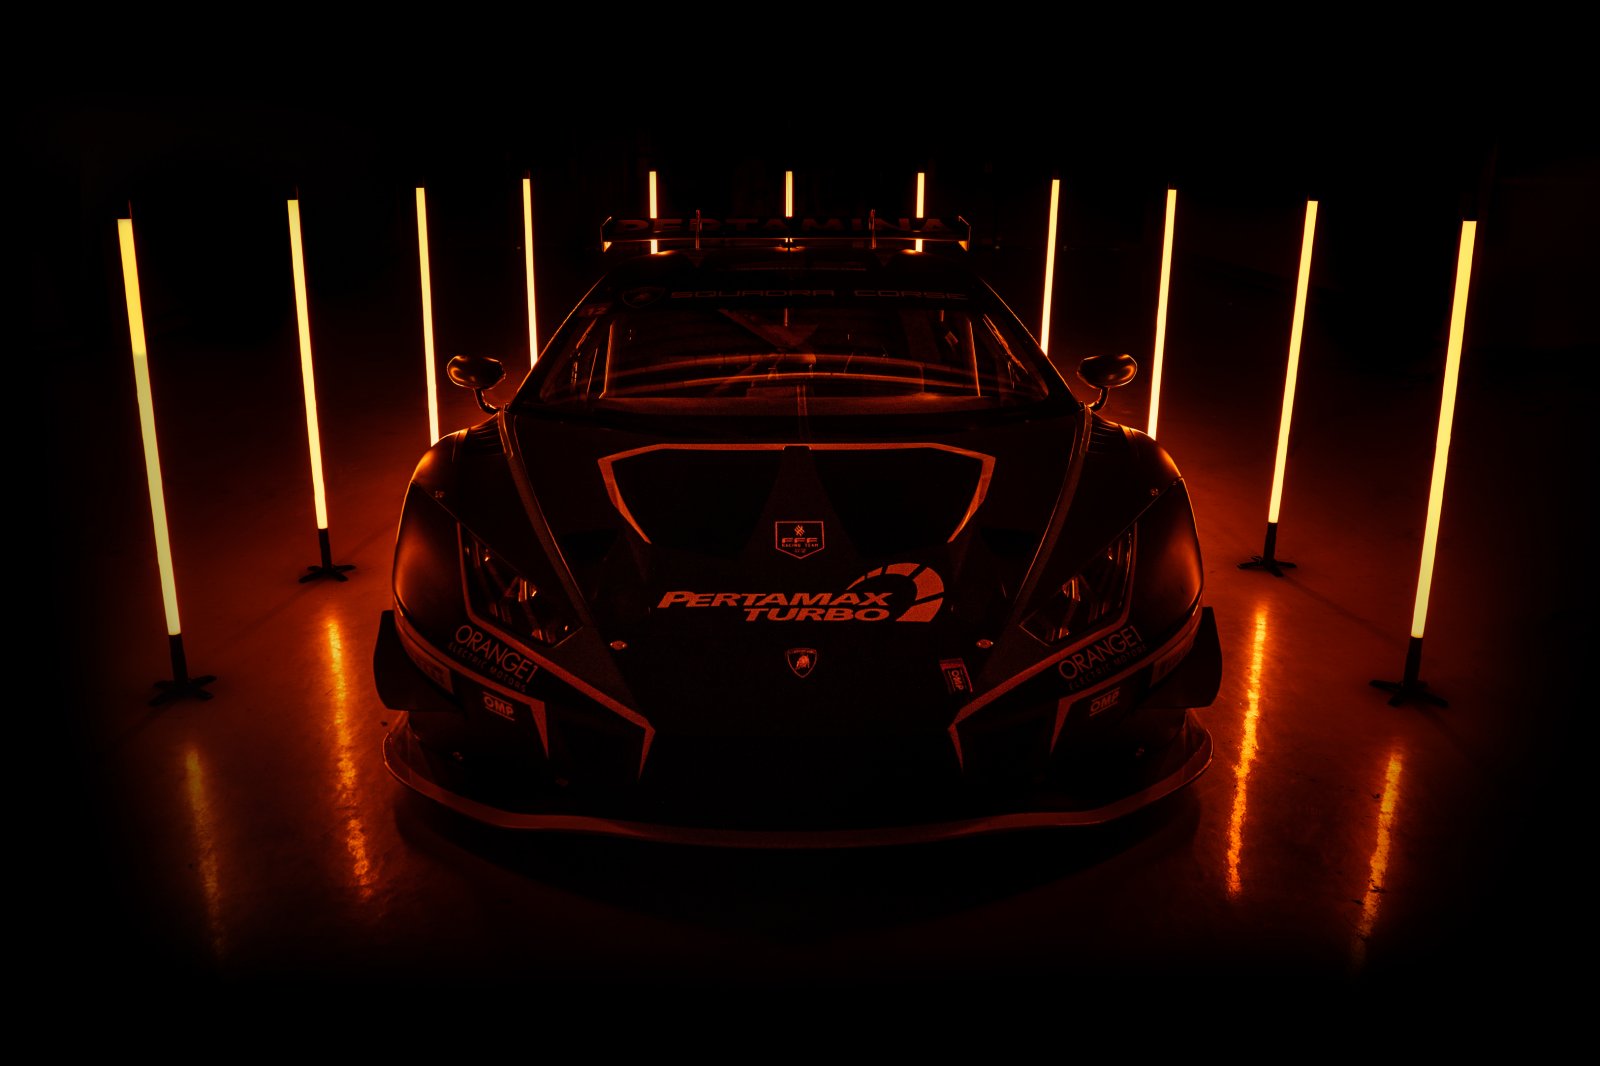 FFF Racing reveals full three-car line-up for 2019 Blancpain GT Series assault